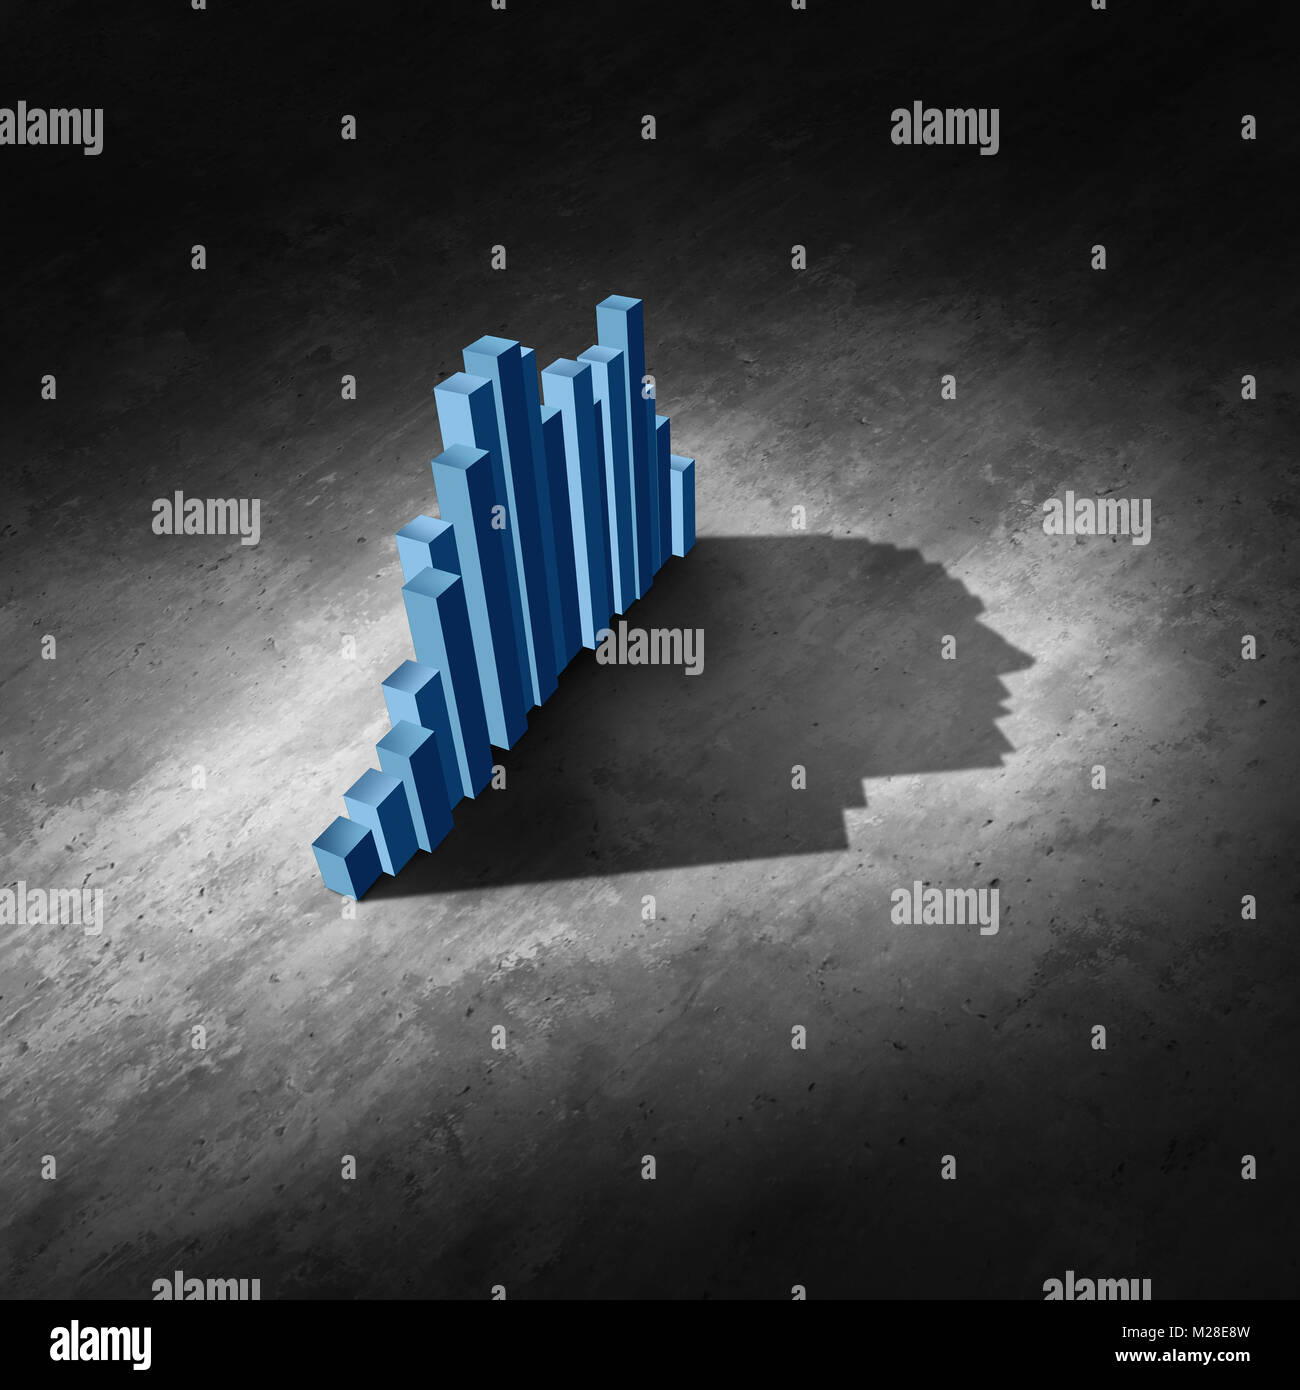 Business data analysis as an abstract financial chart and finance diagram casting a shadow shaped as human head as a 3D illustration. Stock Photo